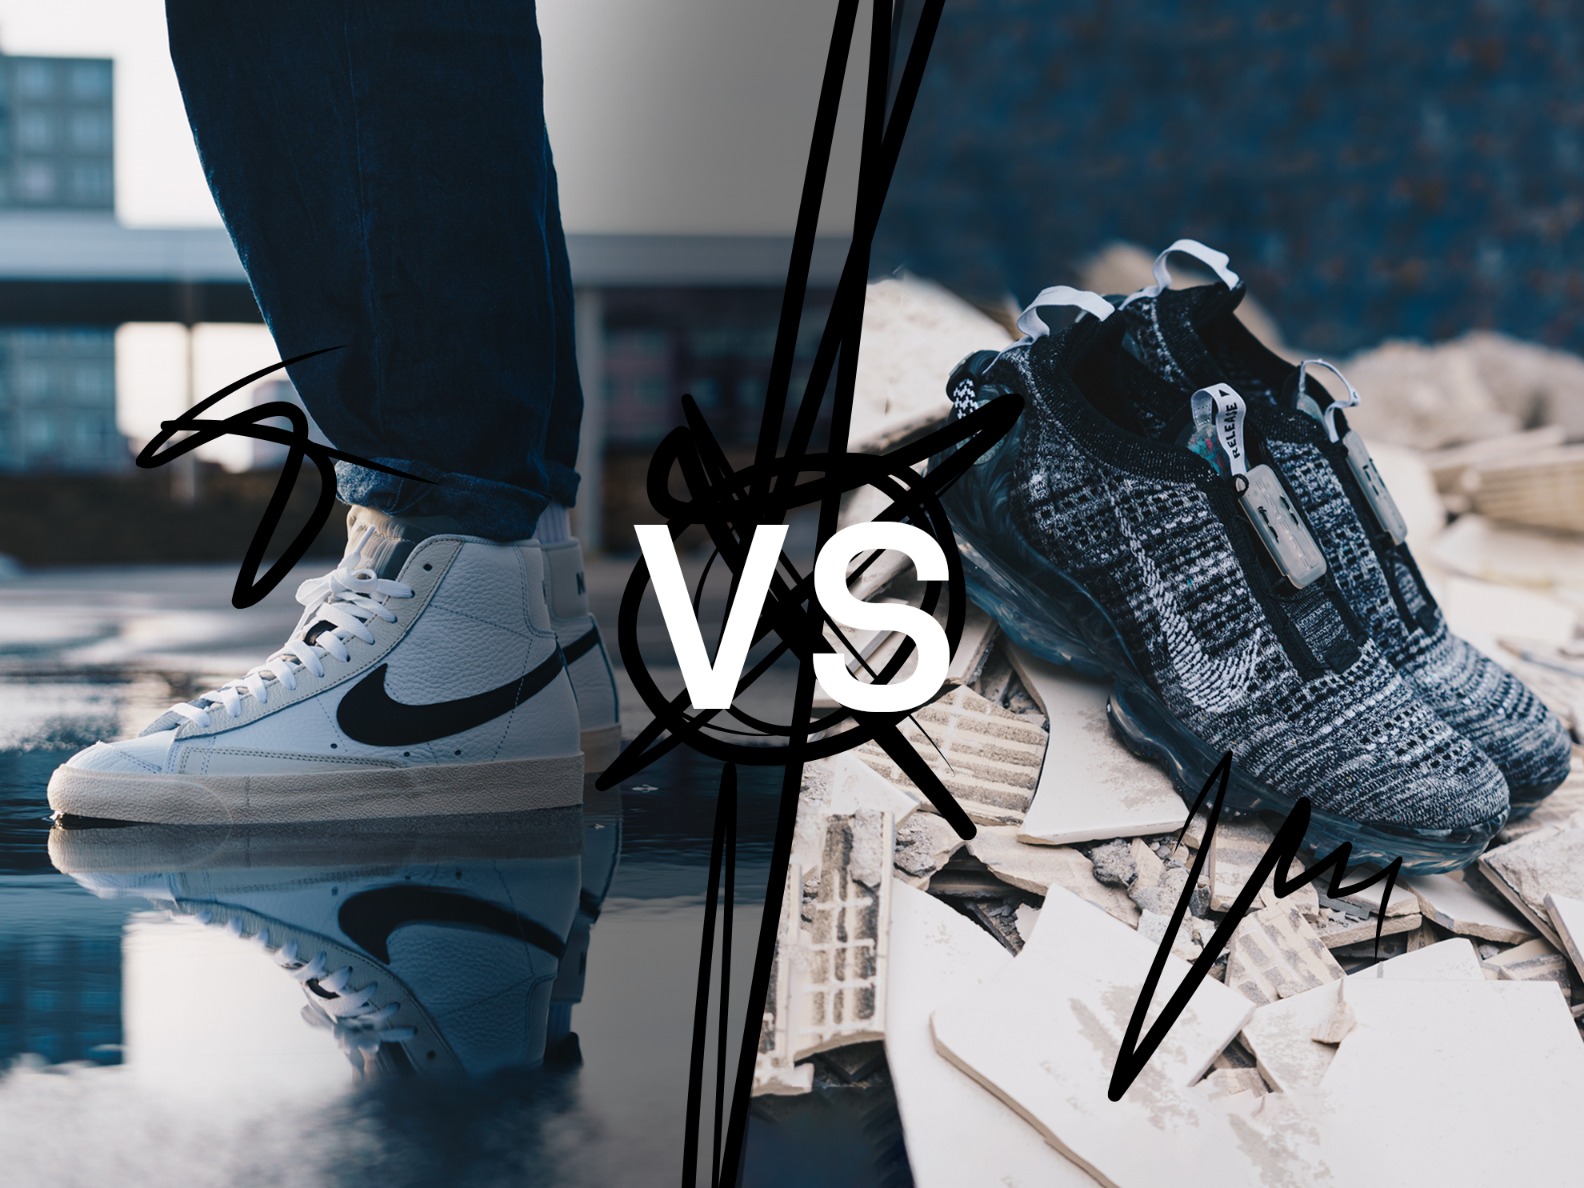 The Nike Blazer vs the Nike Air Vapormax + our crew's opinions